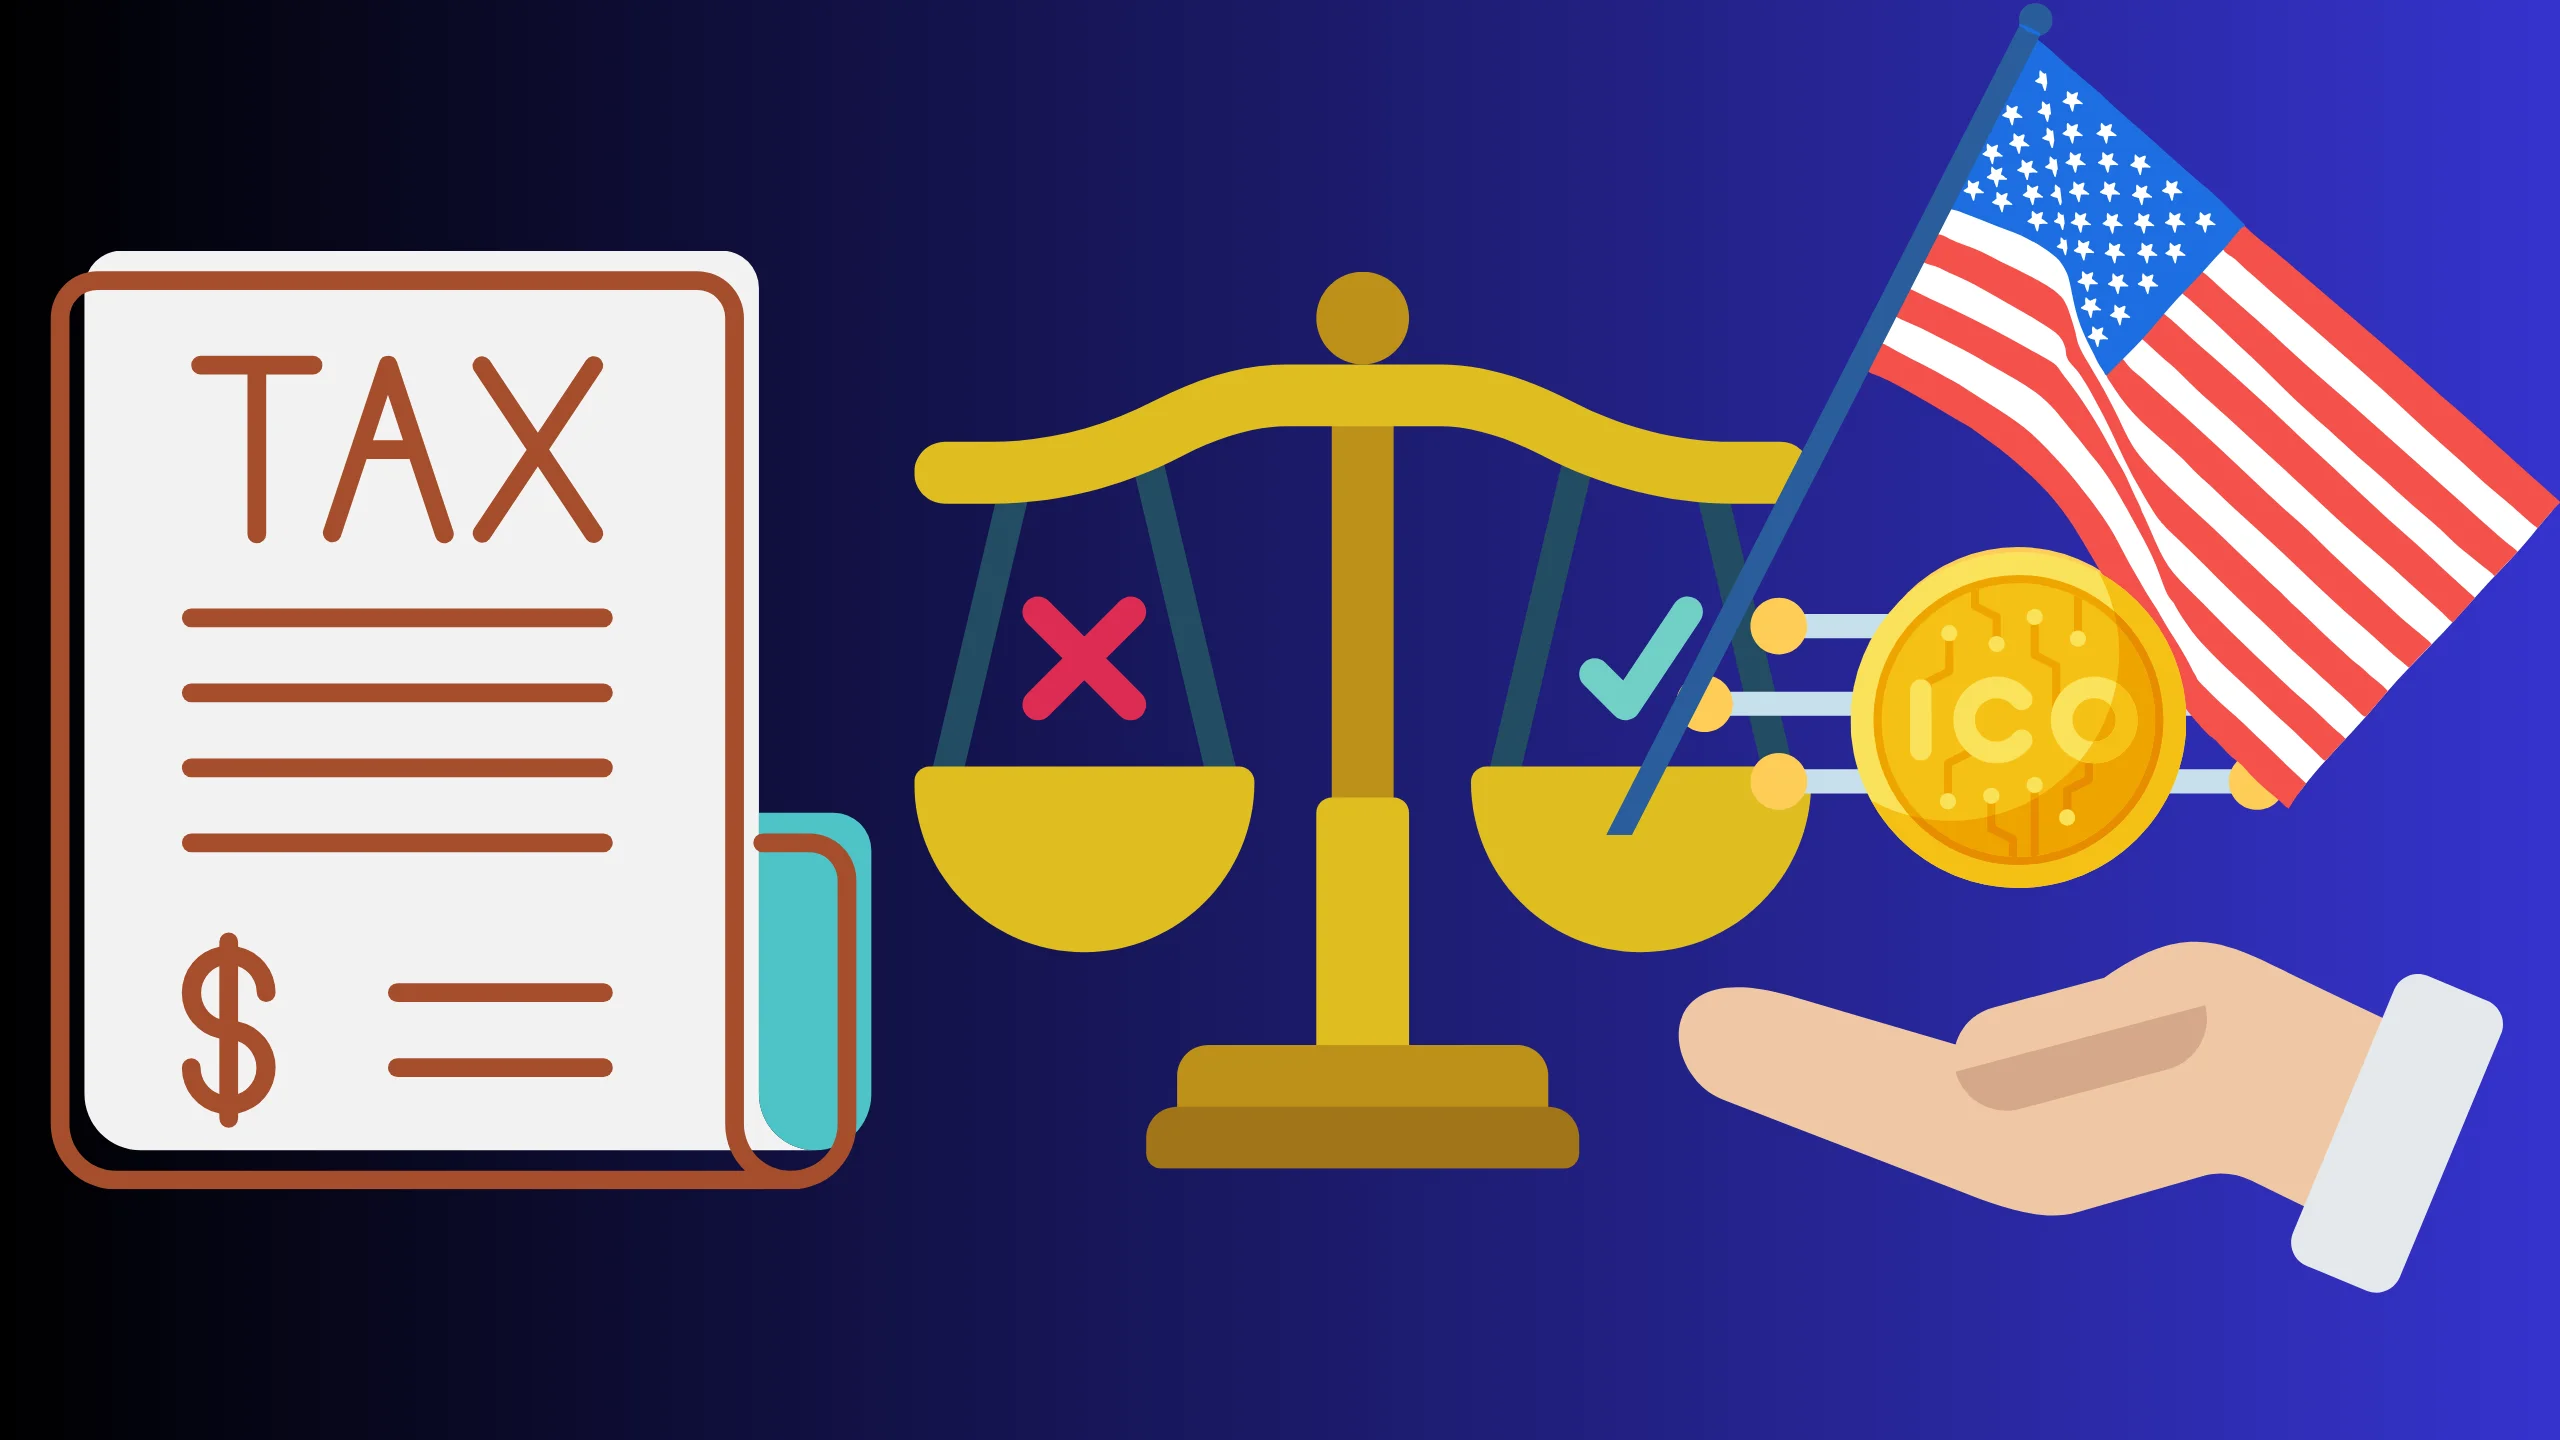 Illustration of tax considerations for ICOs in the United States, including regulatory compliance, reporting obligations, and tax liabilities. Highlights key issues such as capital gains, income reporting, and IRS guidelines for cryptocurrency transactions.